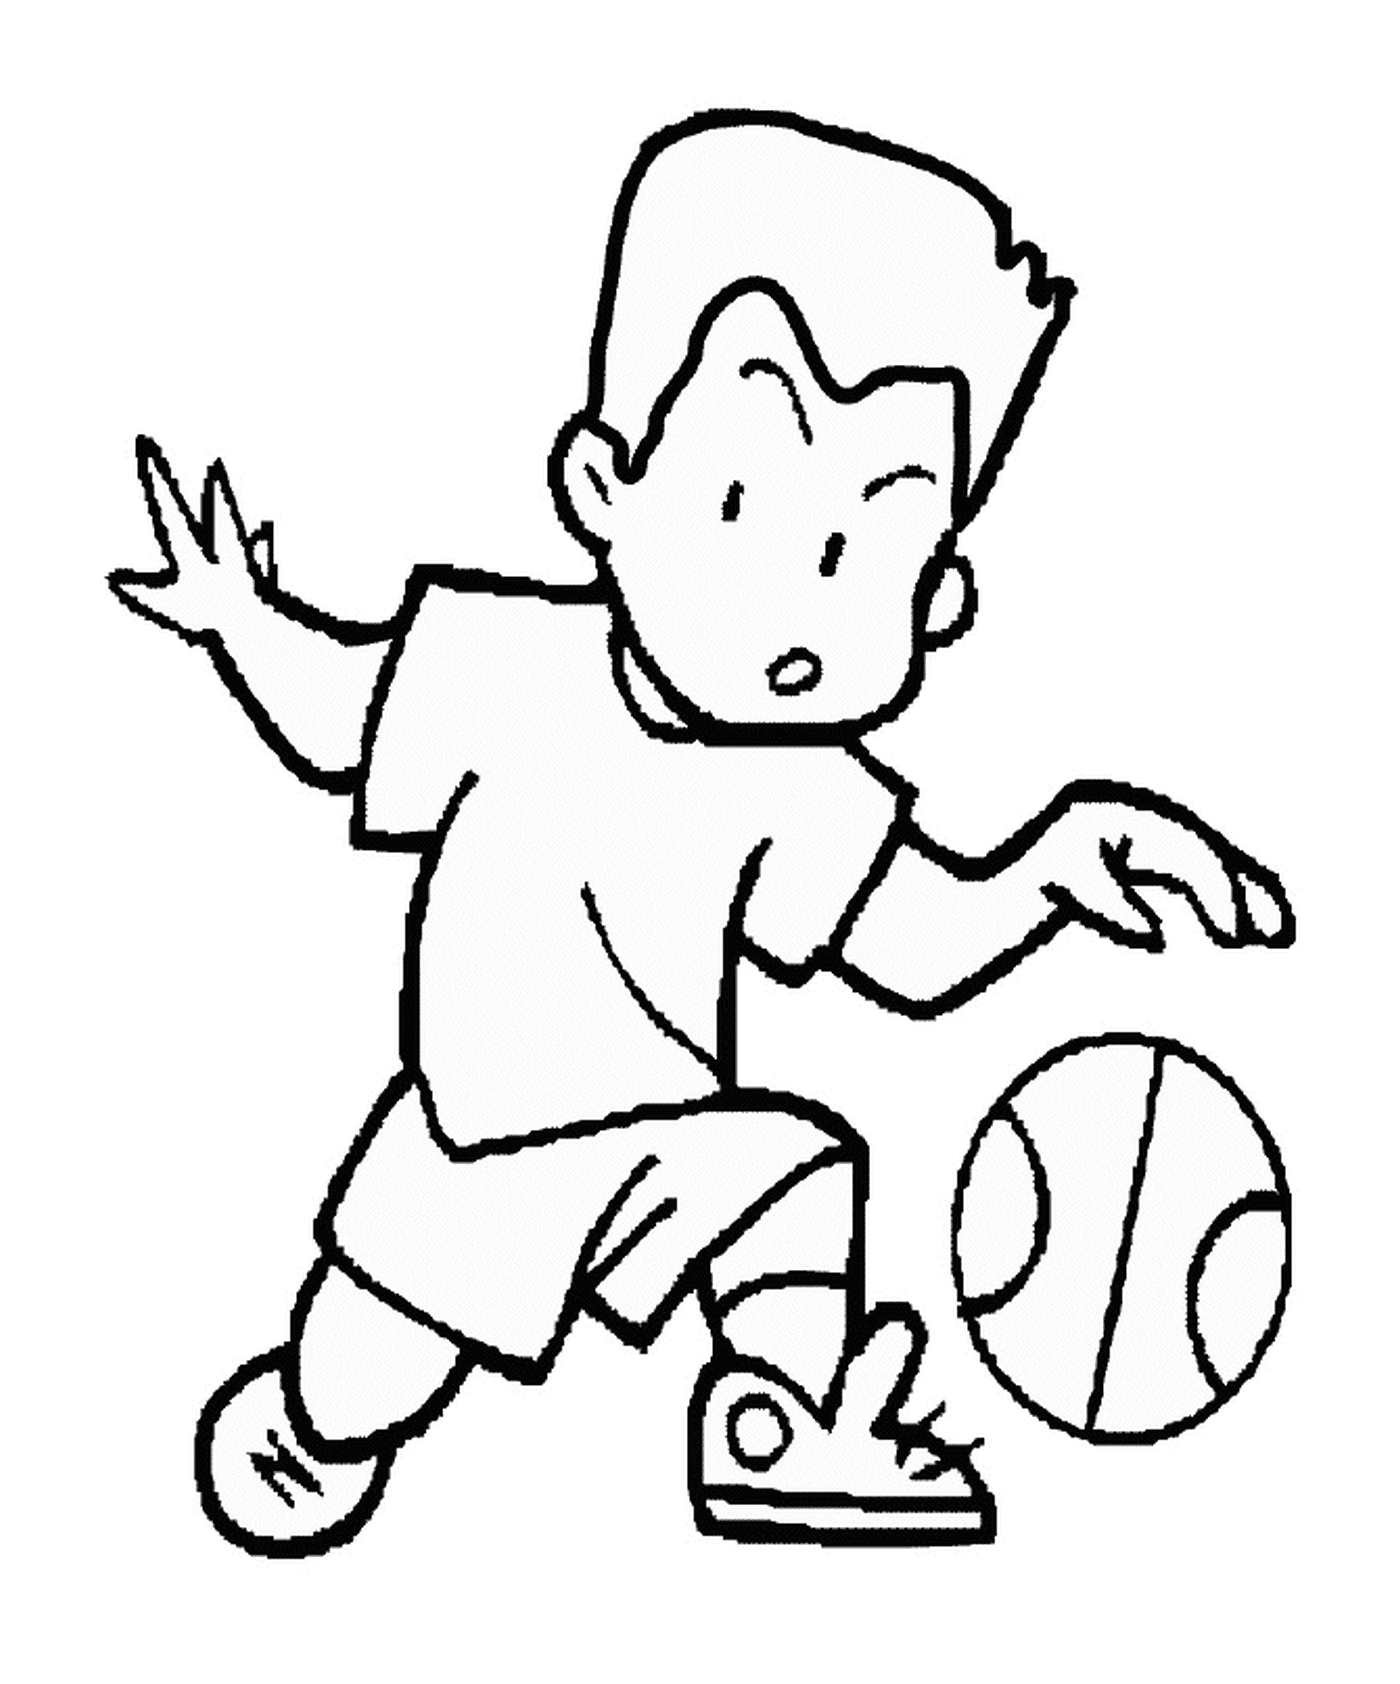  A child with a basketball ball 